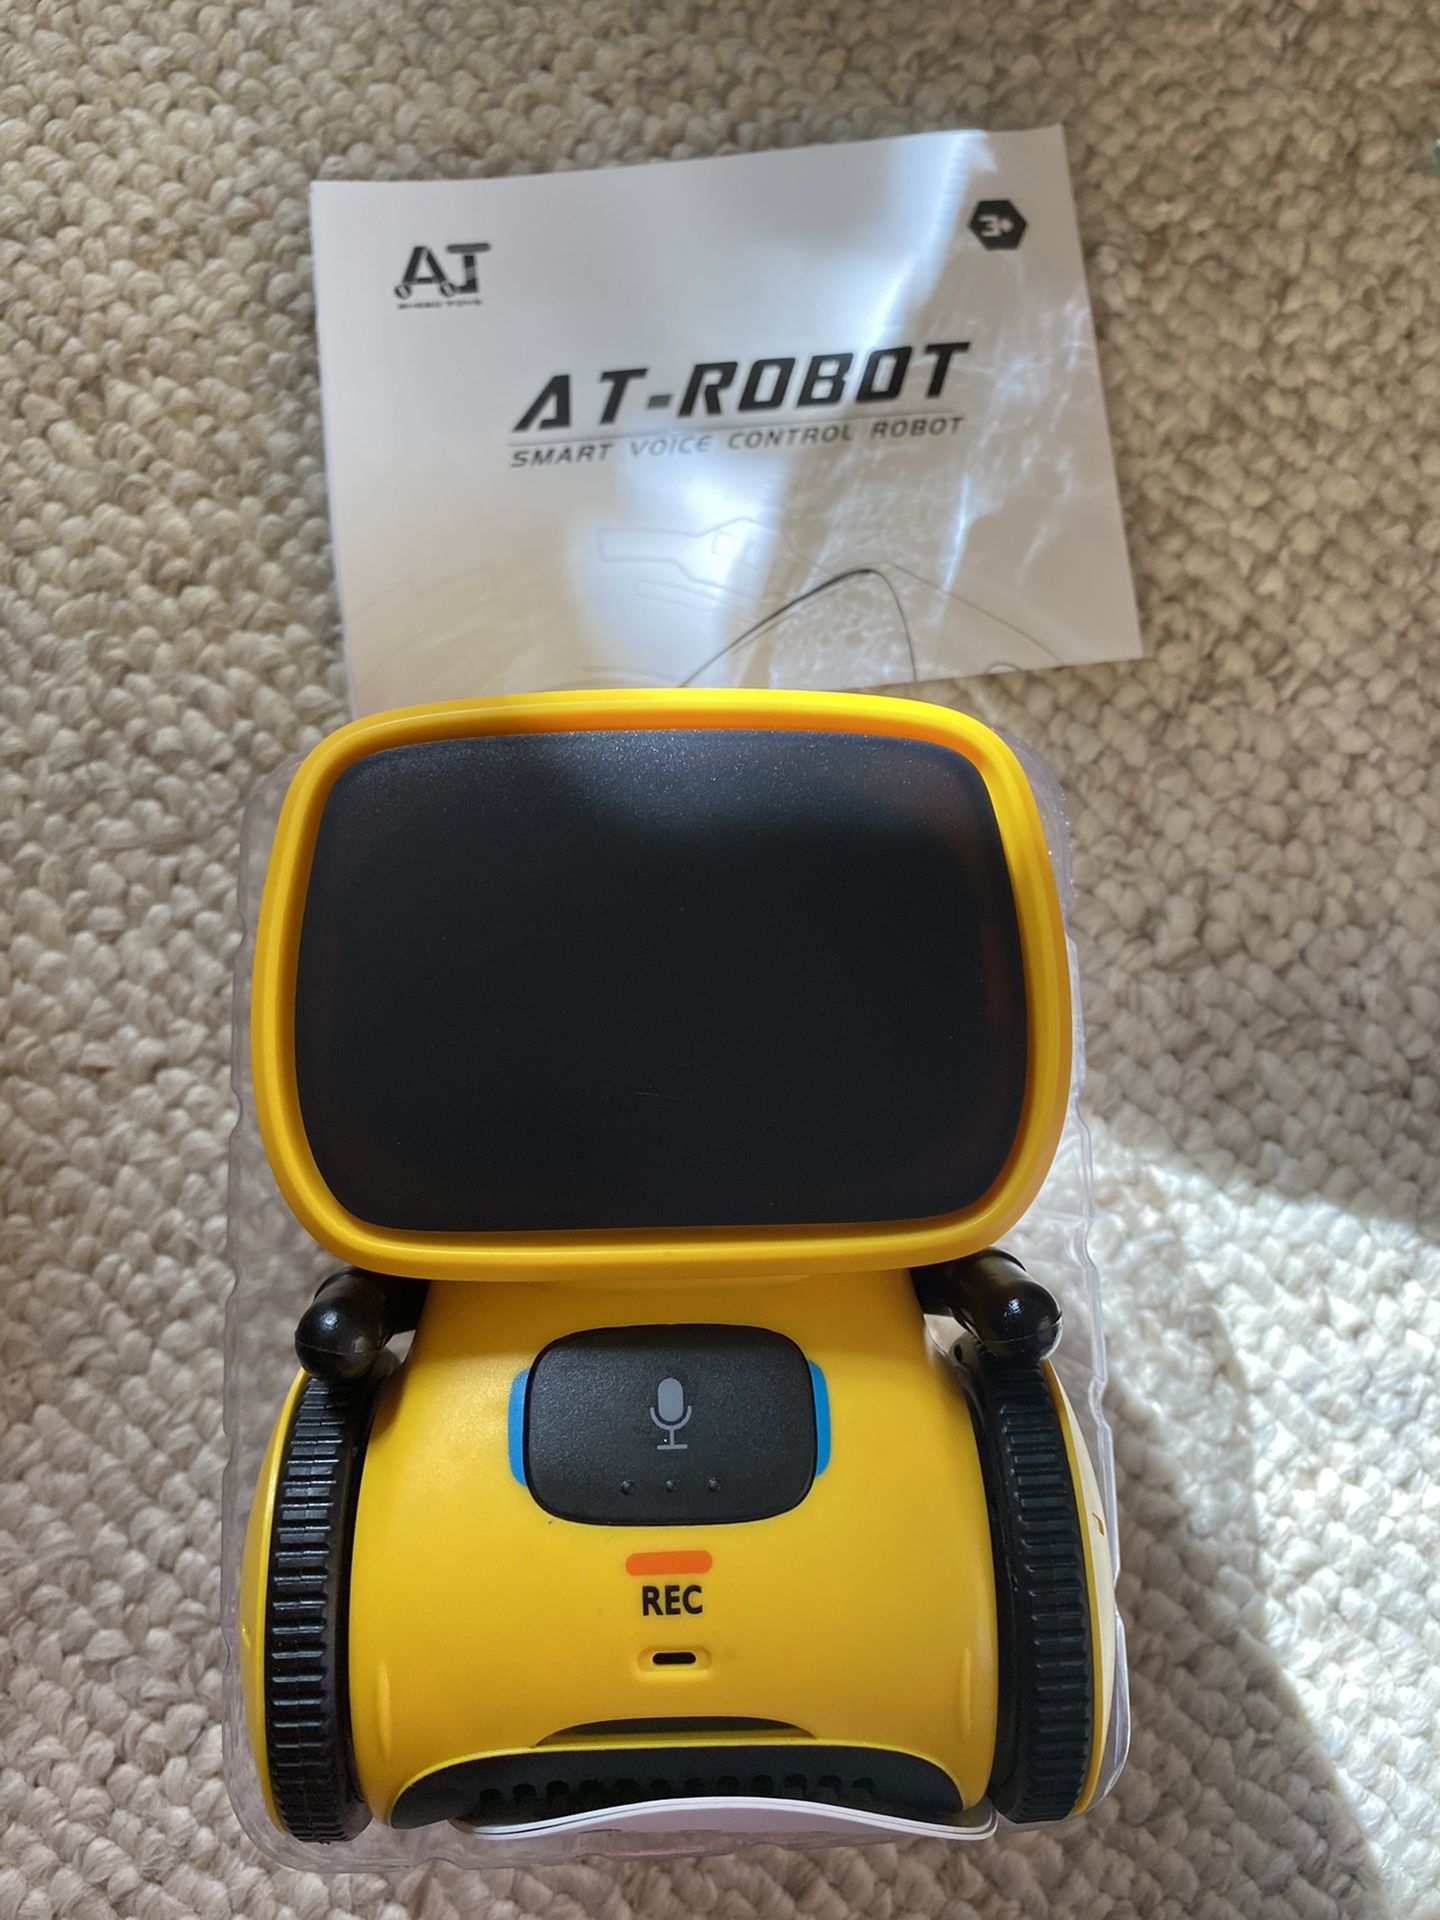 Smart voice control robot (great Christmas gift)